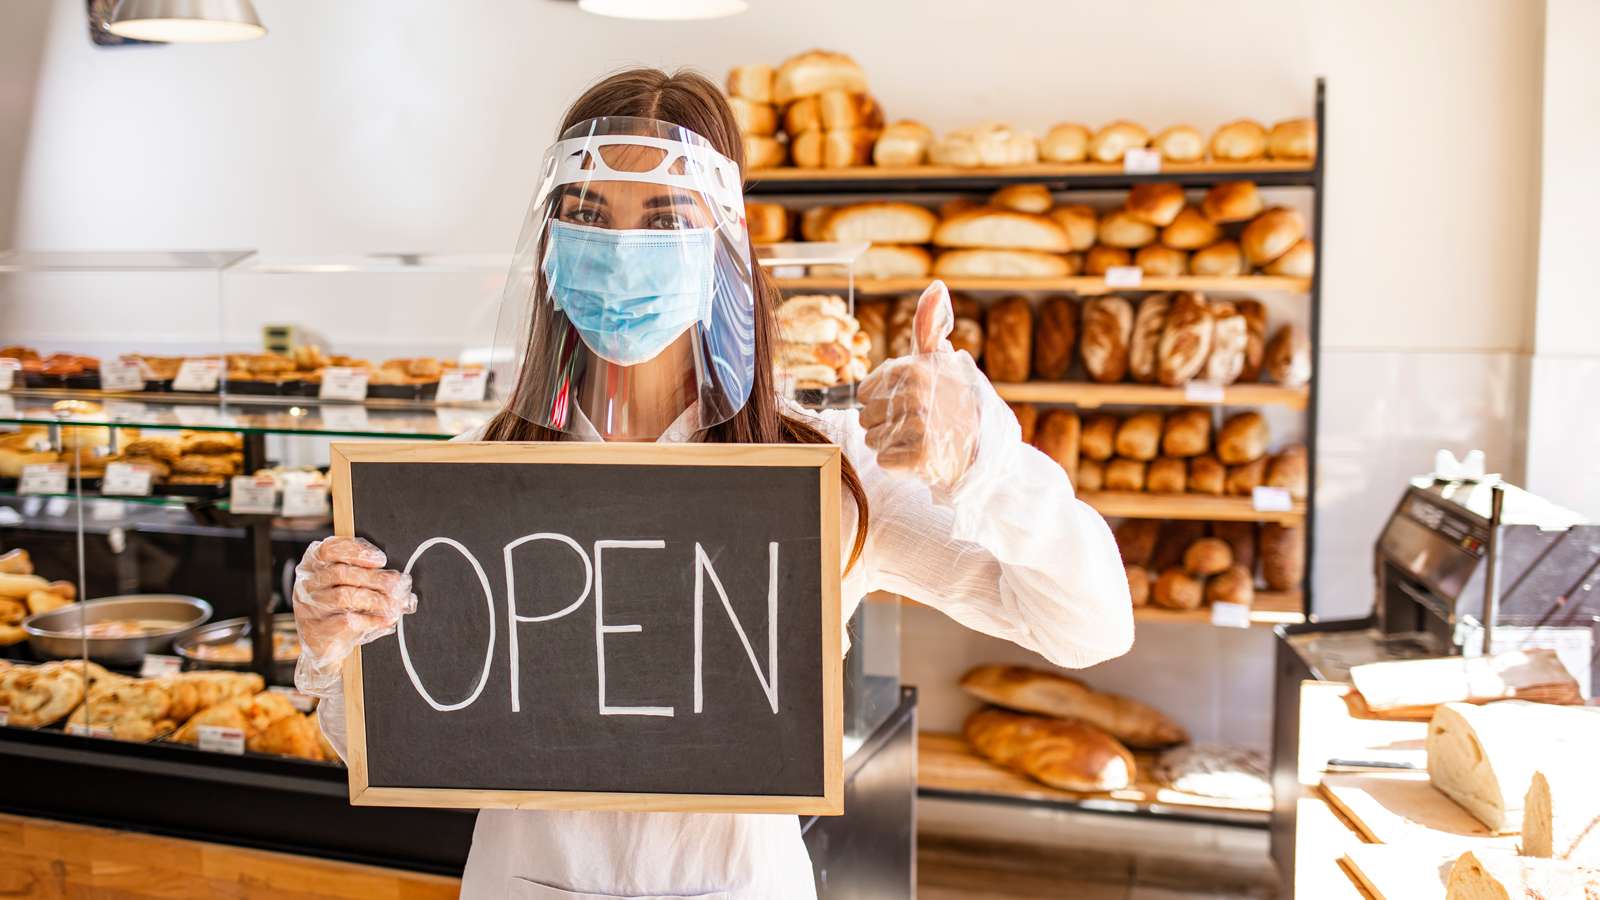 Business owner with face mask holding open sign